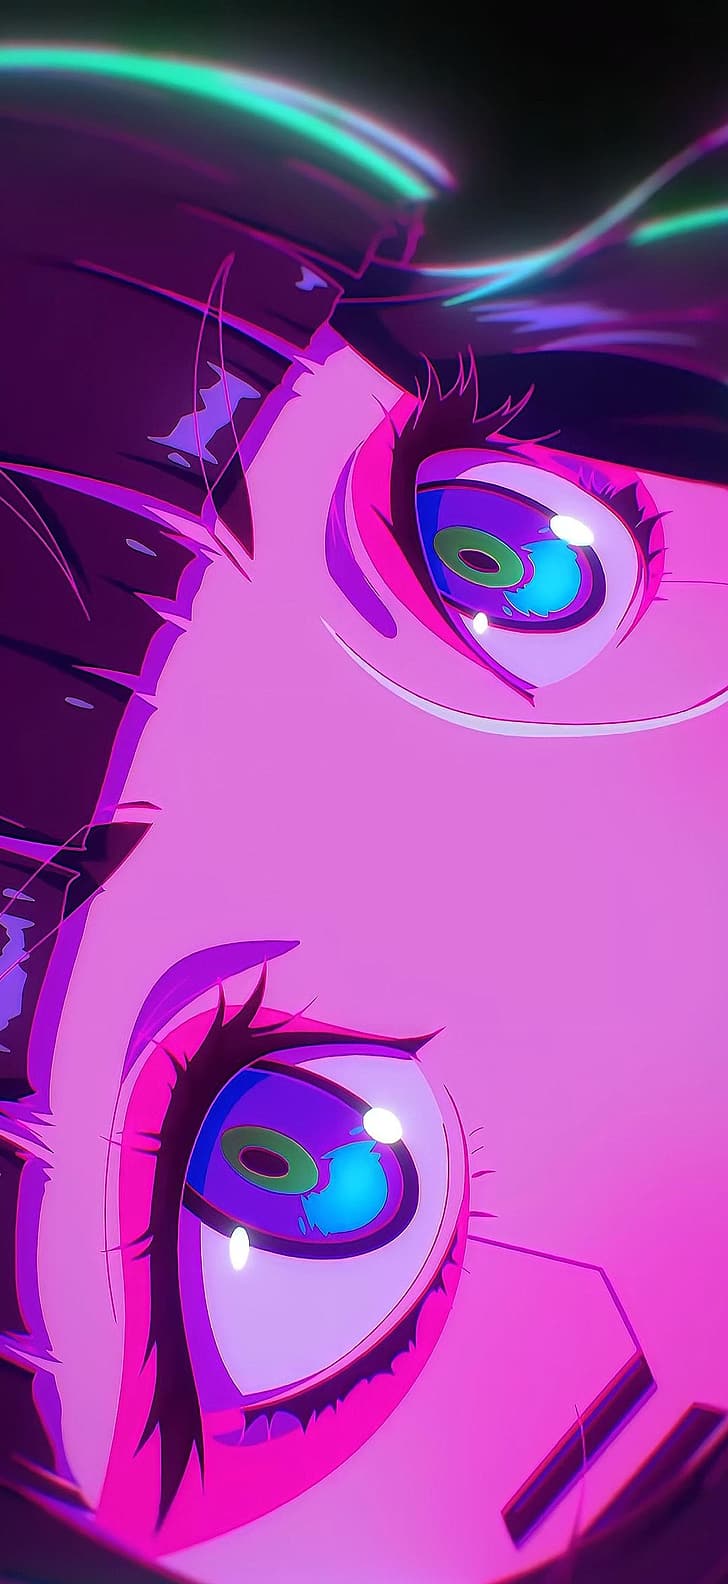 Anime eyes wallpaper for your phone - Cyberpunk